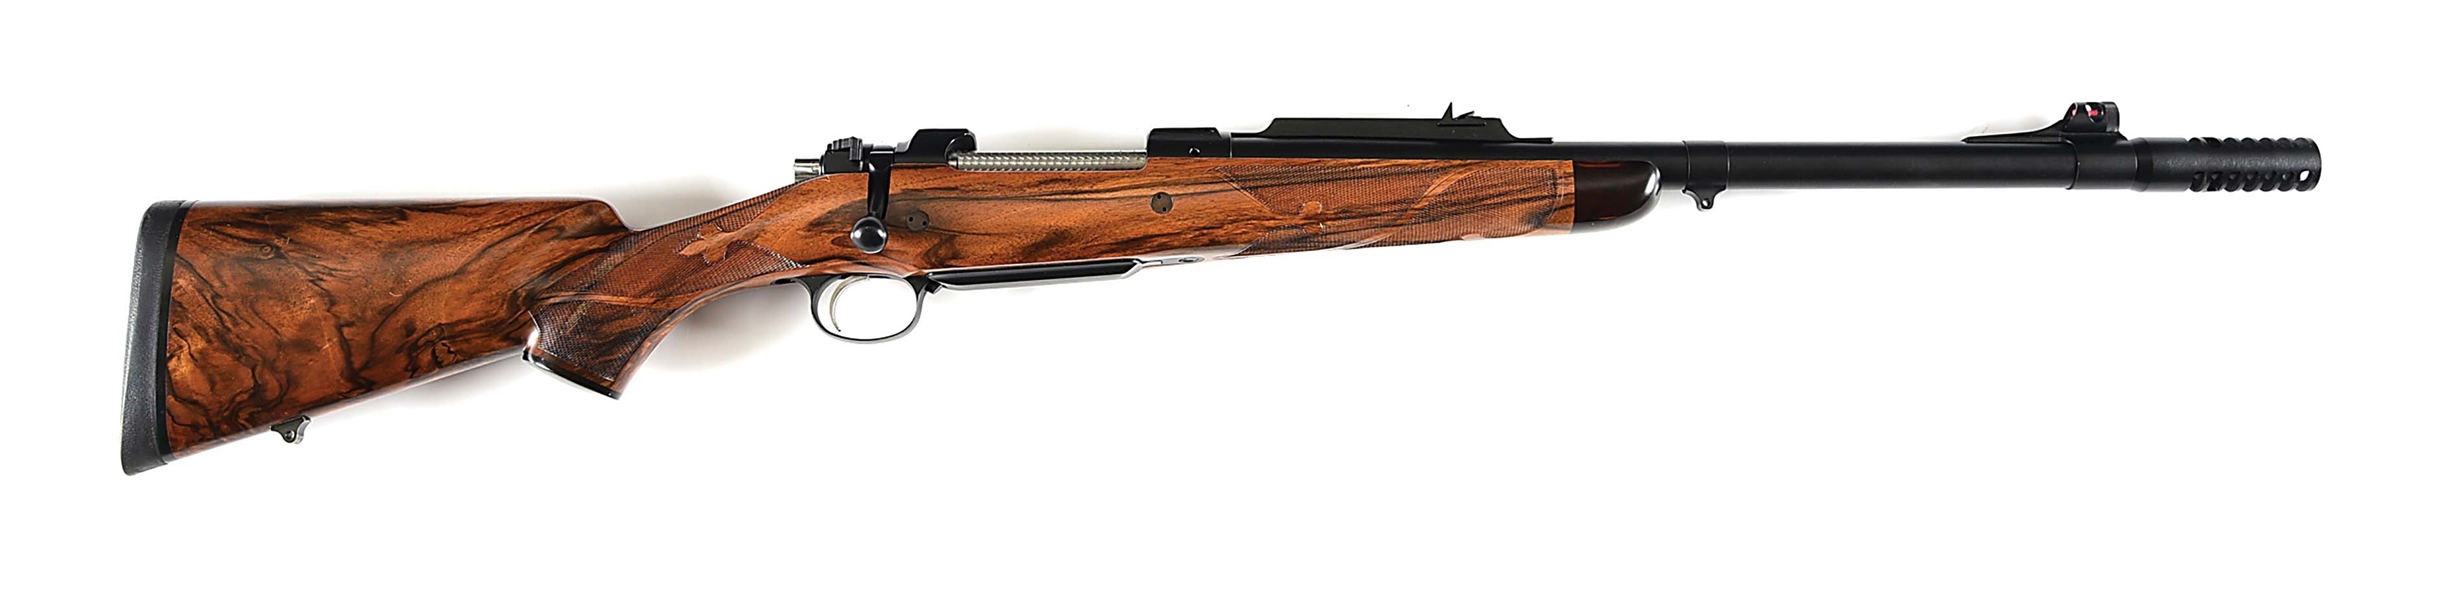 (M) CZ 550 MAGNUM BOLT ACTION RIFLE CHAMBERED IN .600 OVERKILL.